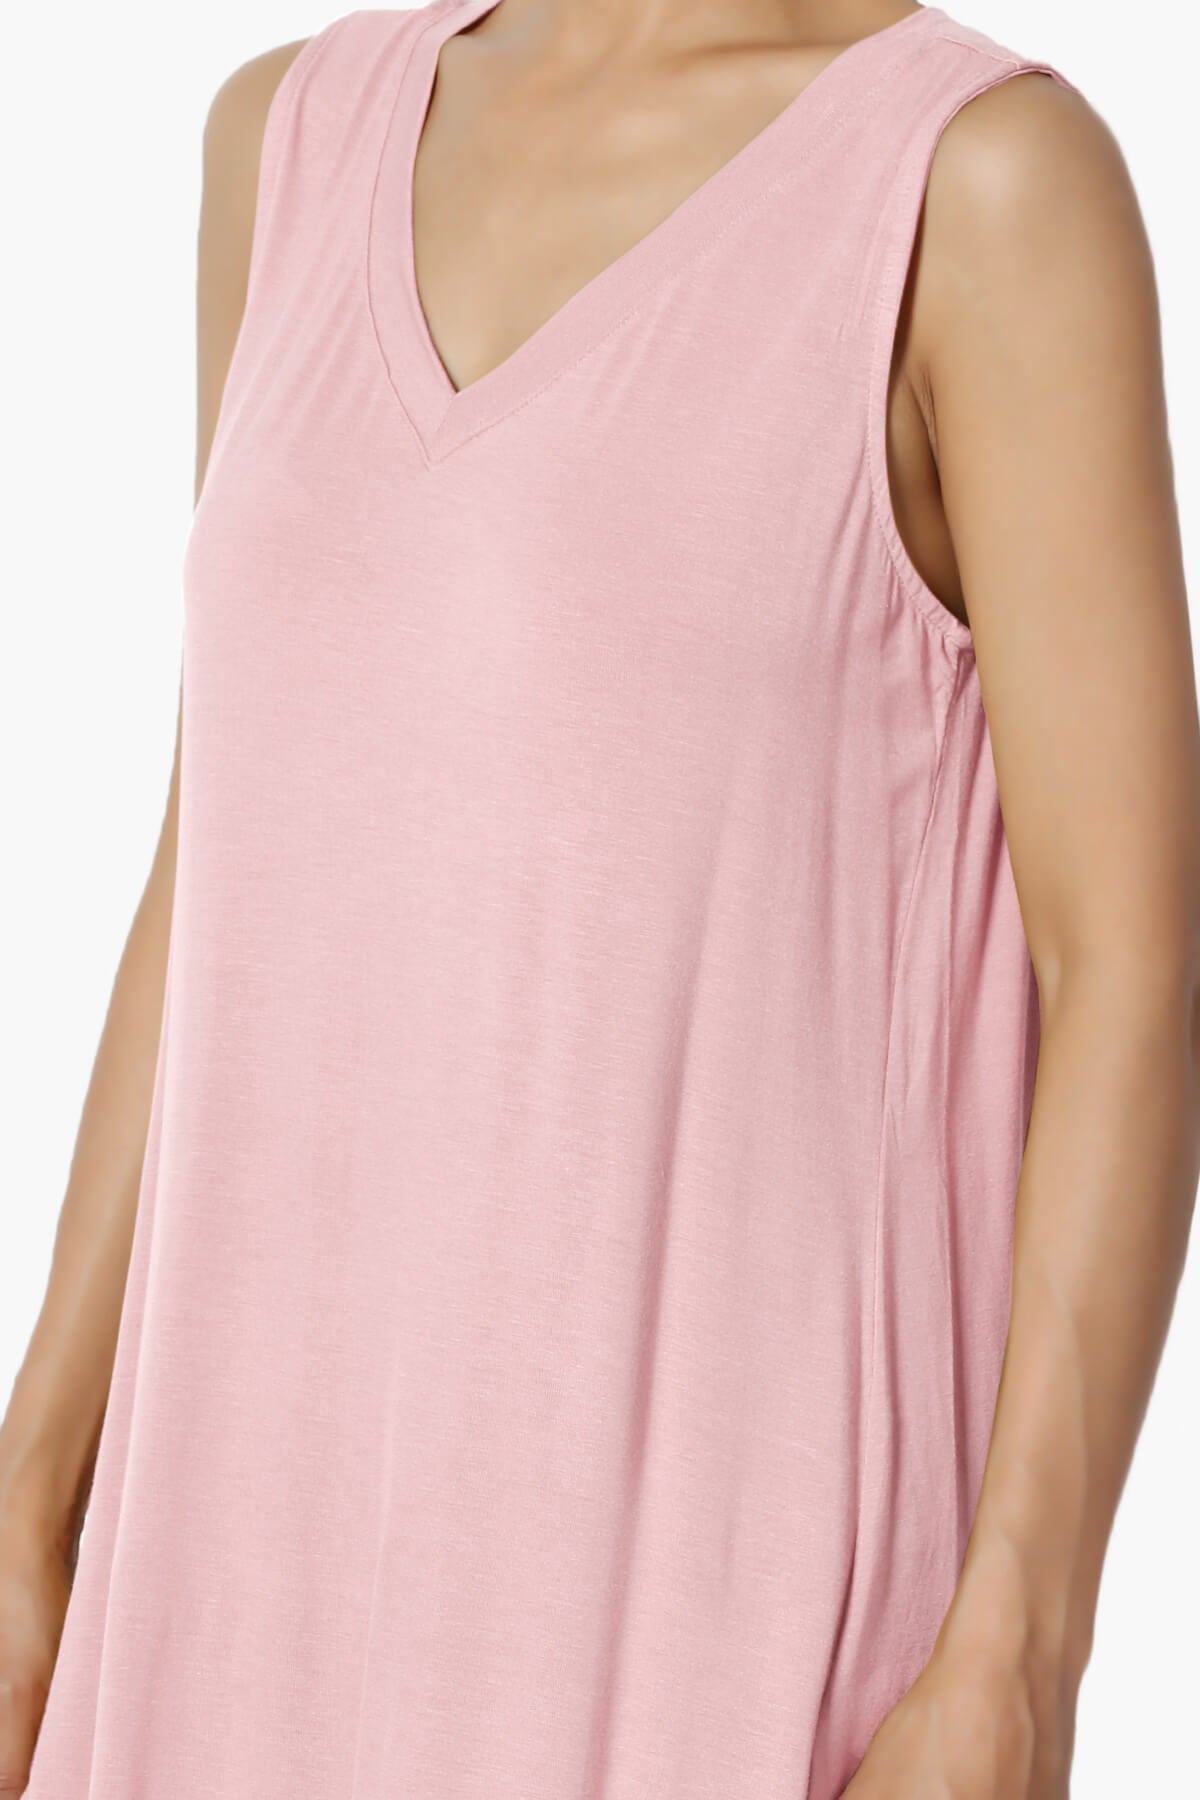 Myles Sleeveless V-Neck Luxe Jersey Top DUSTY PINK_5